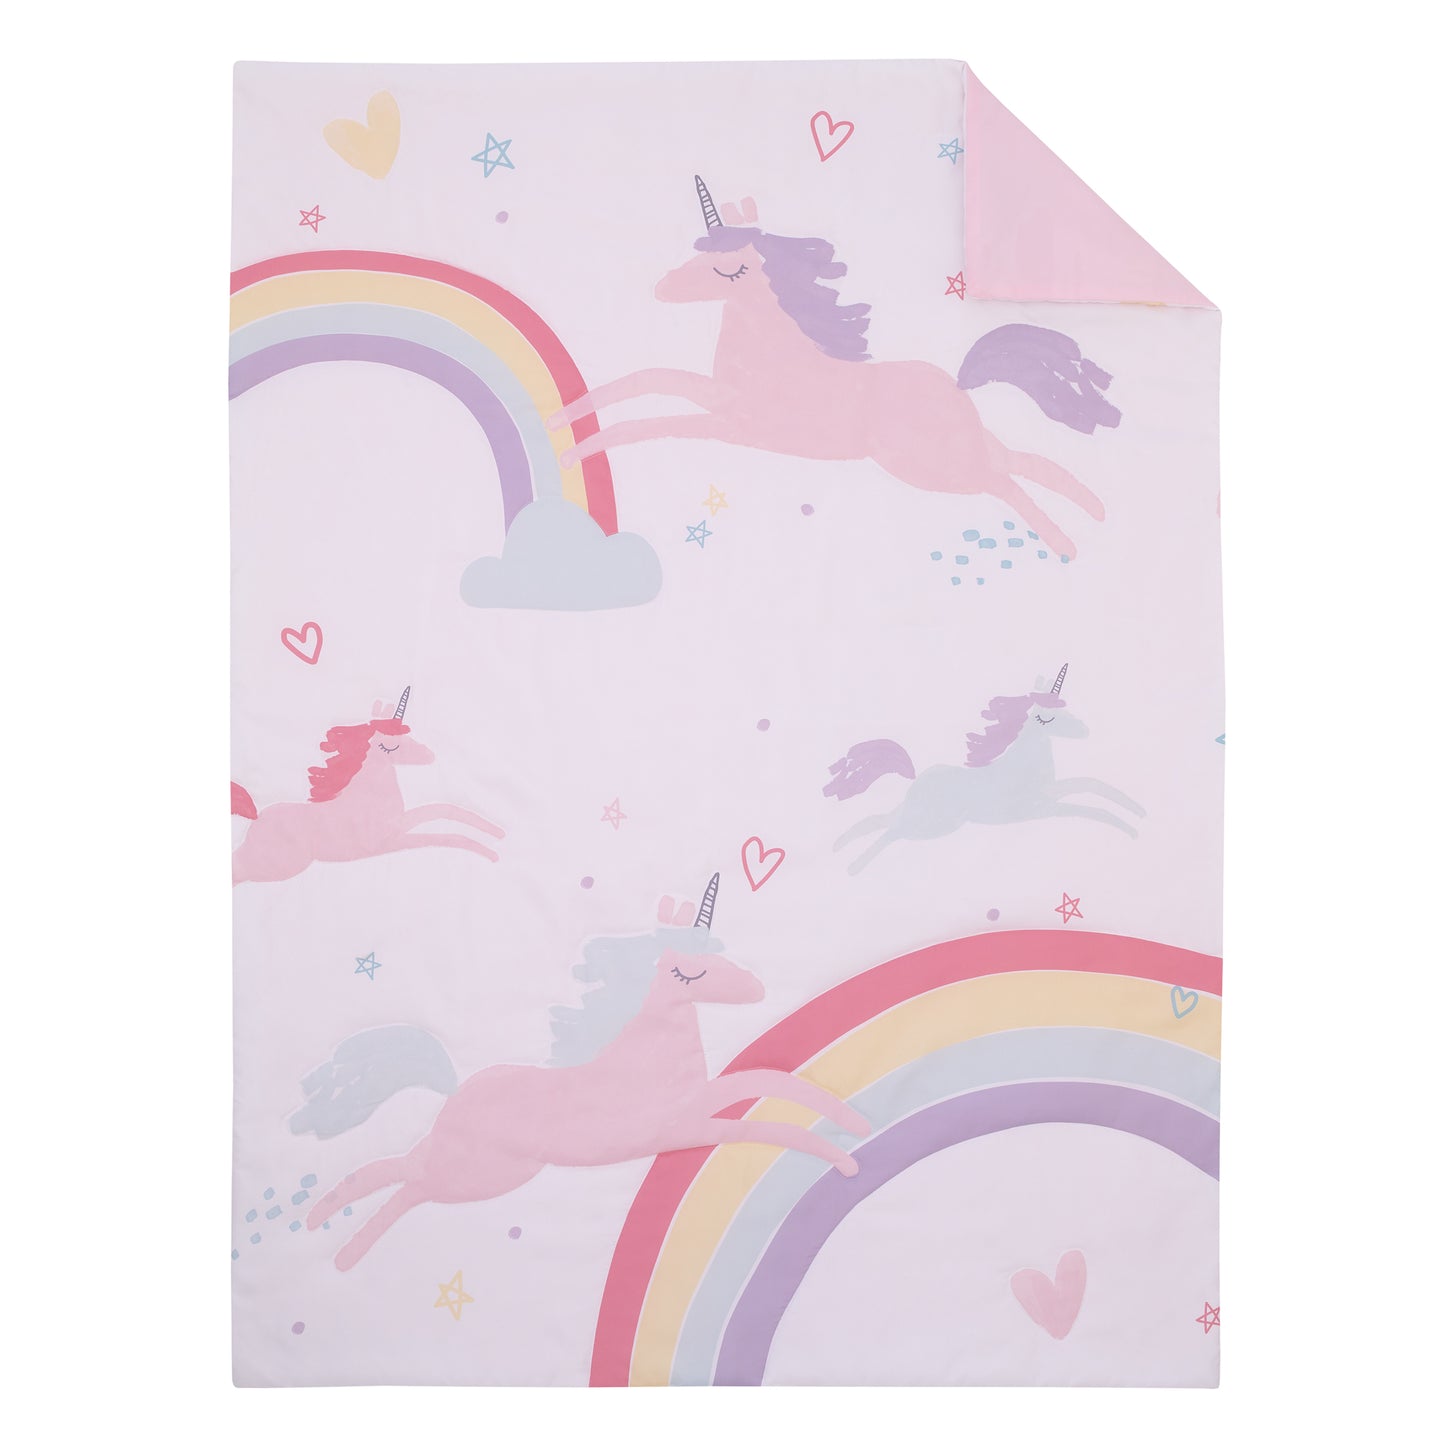 Carter's Rainbow Unicorn Pink, Purple, and Aqua Dream Big 4 Piece Toddler Bed Set - Comforter, Fitted Bottom Sheet, Flat Top Sheet, and Reversible Pillowcase